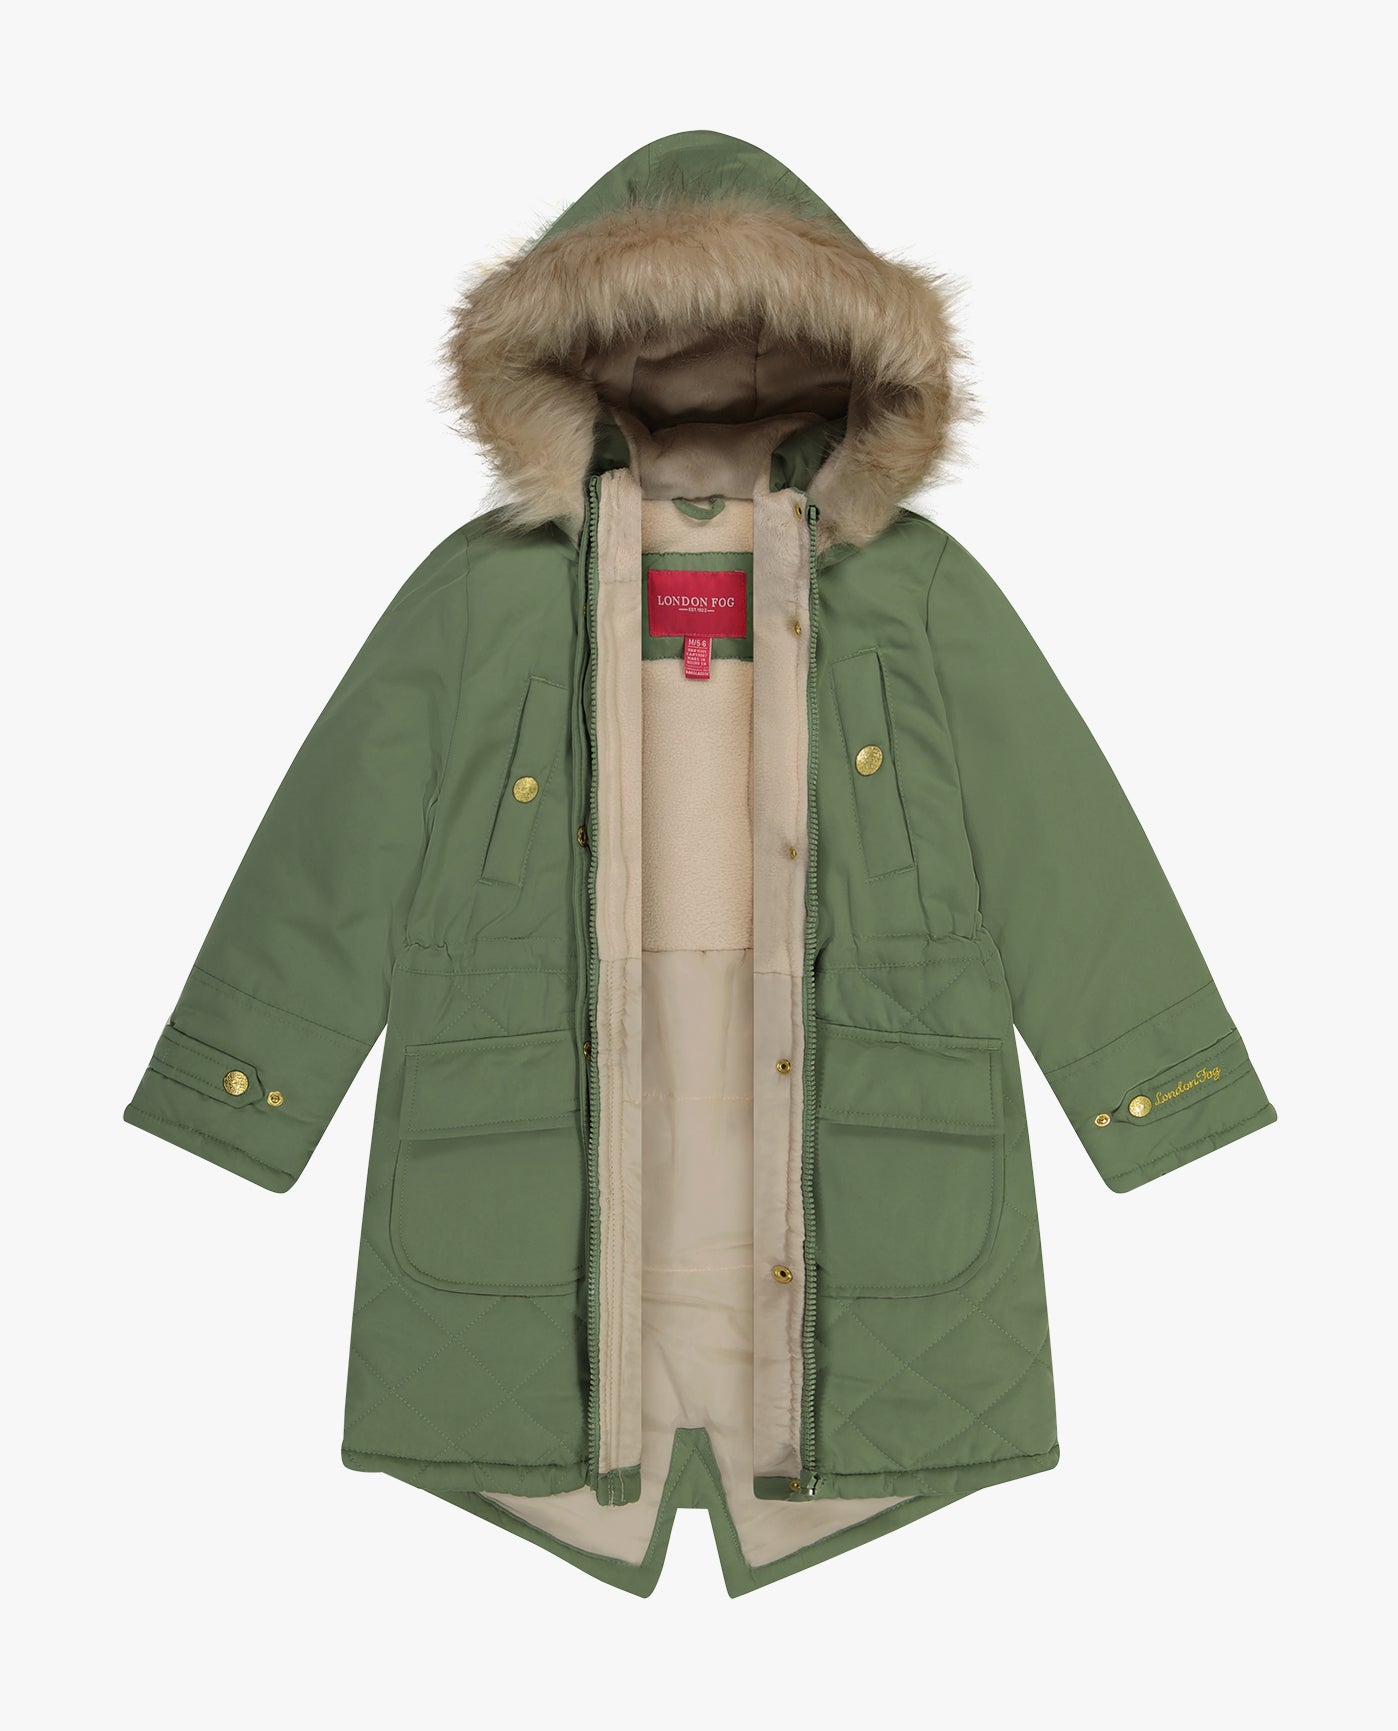 Detail View Of GIRLS ZIP-FRONT MID CINCH QUILTED PARKA WITH FUR TRIMMED HOOD | OLIVE